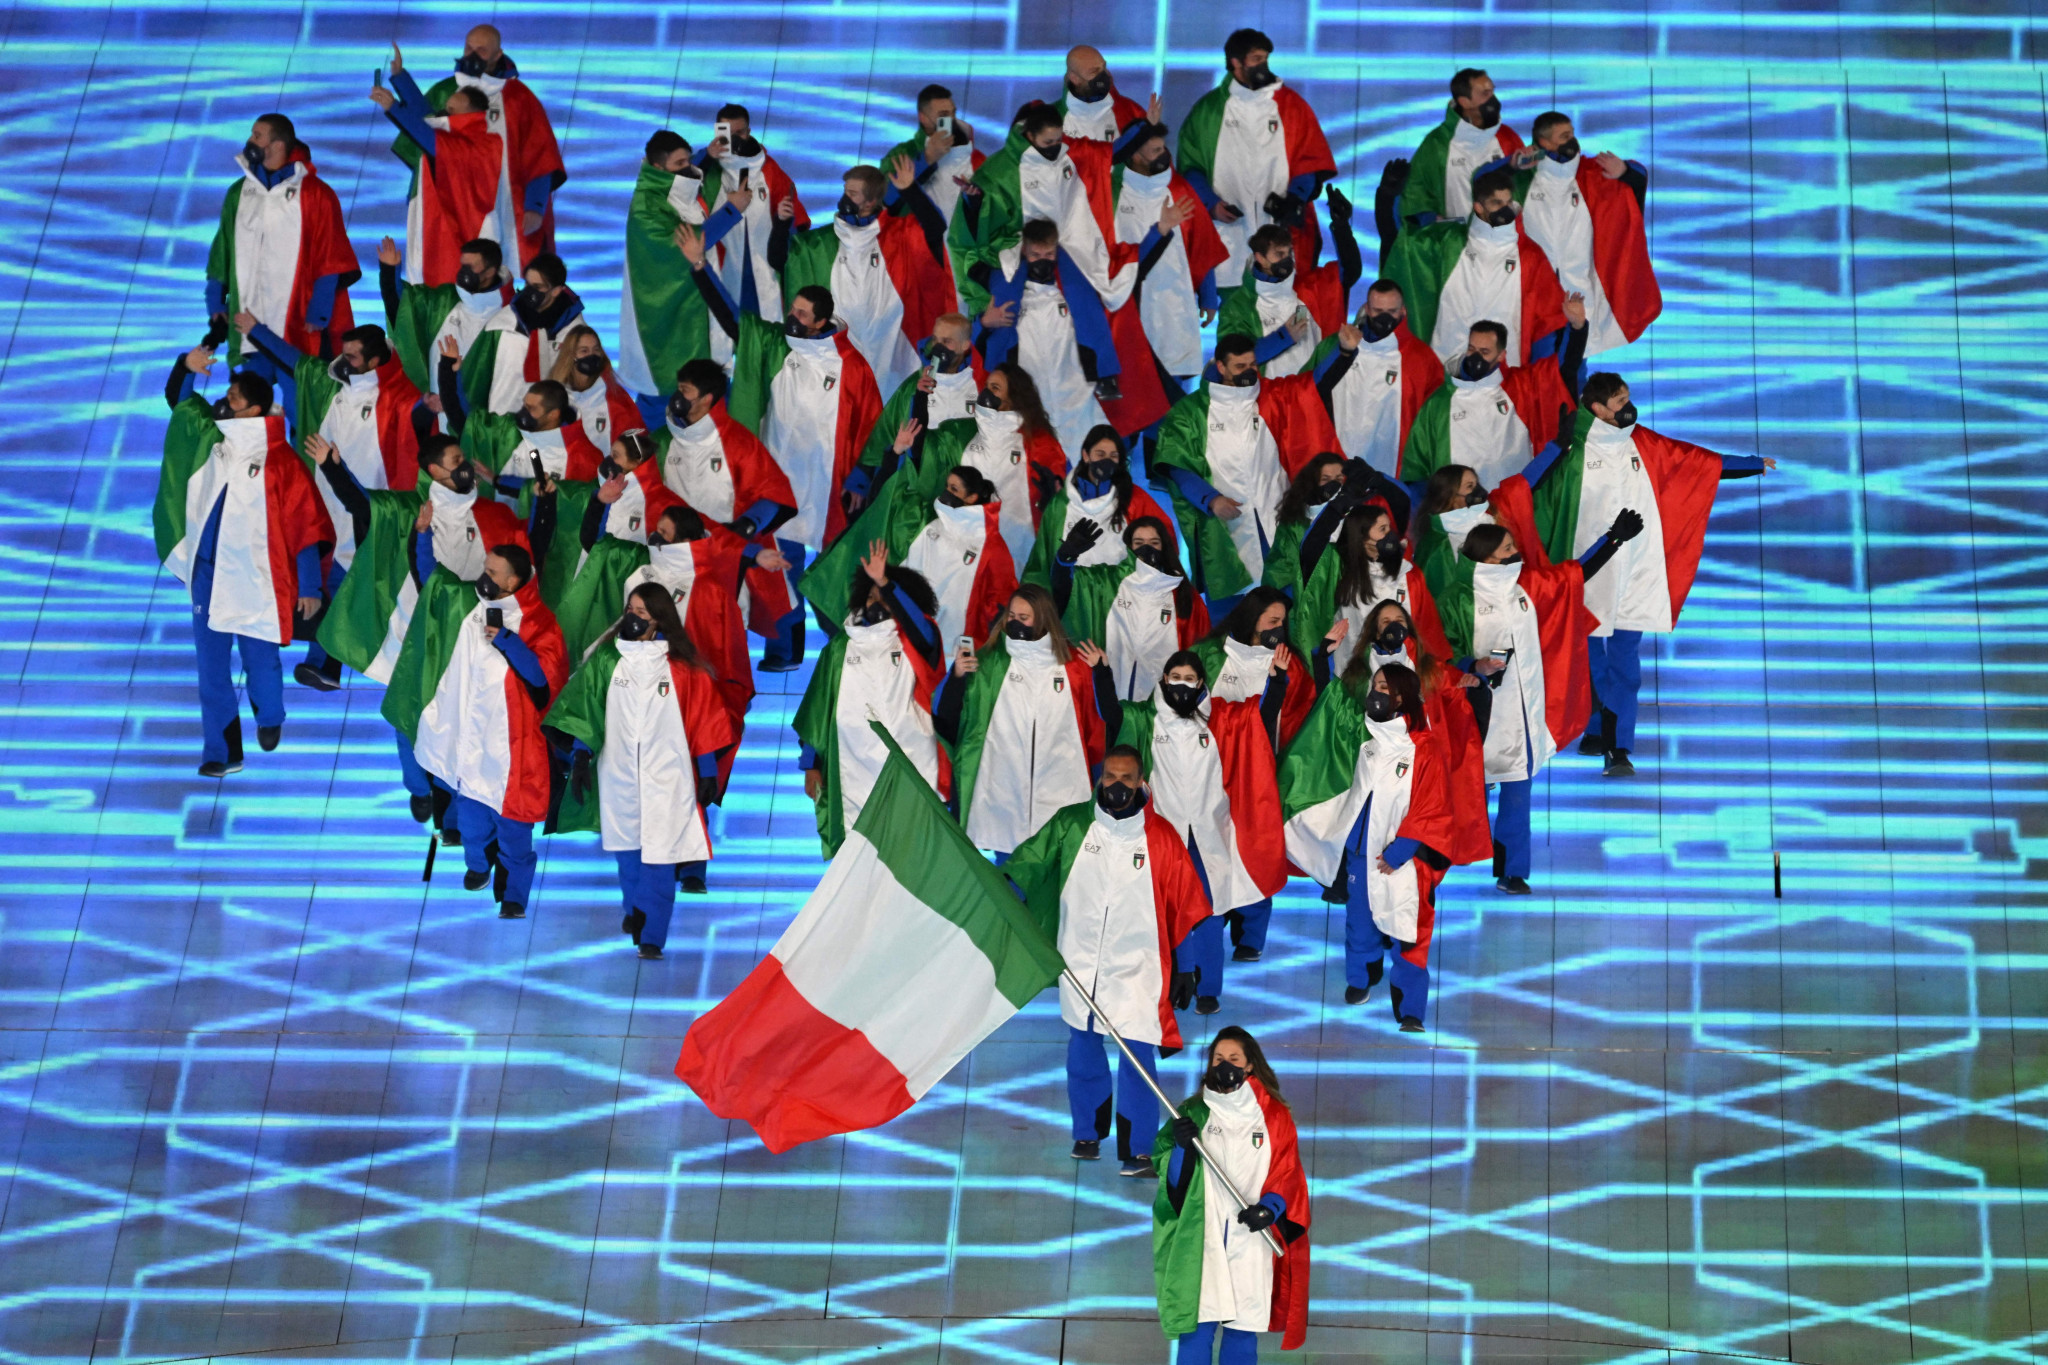 The Italian team wore Armani at the Beijing 2022 Opening Ceremony ©Getty Images